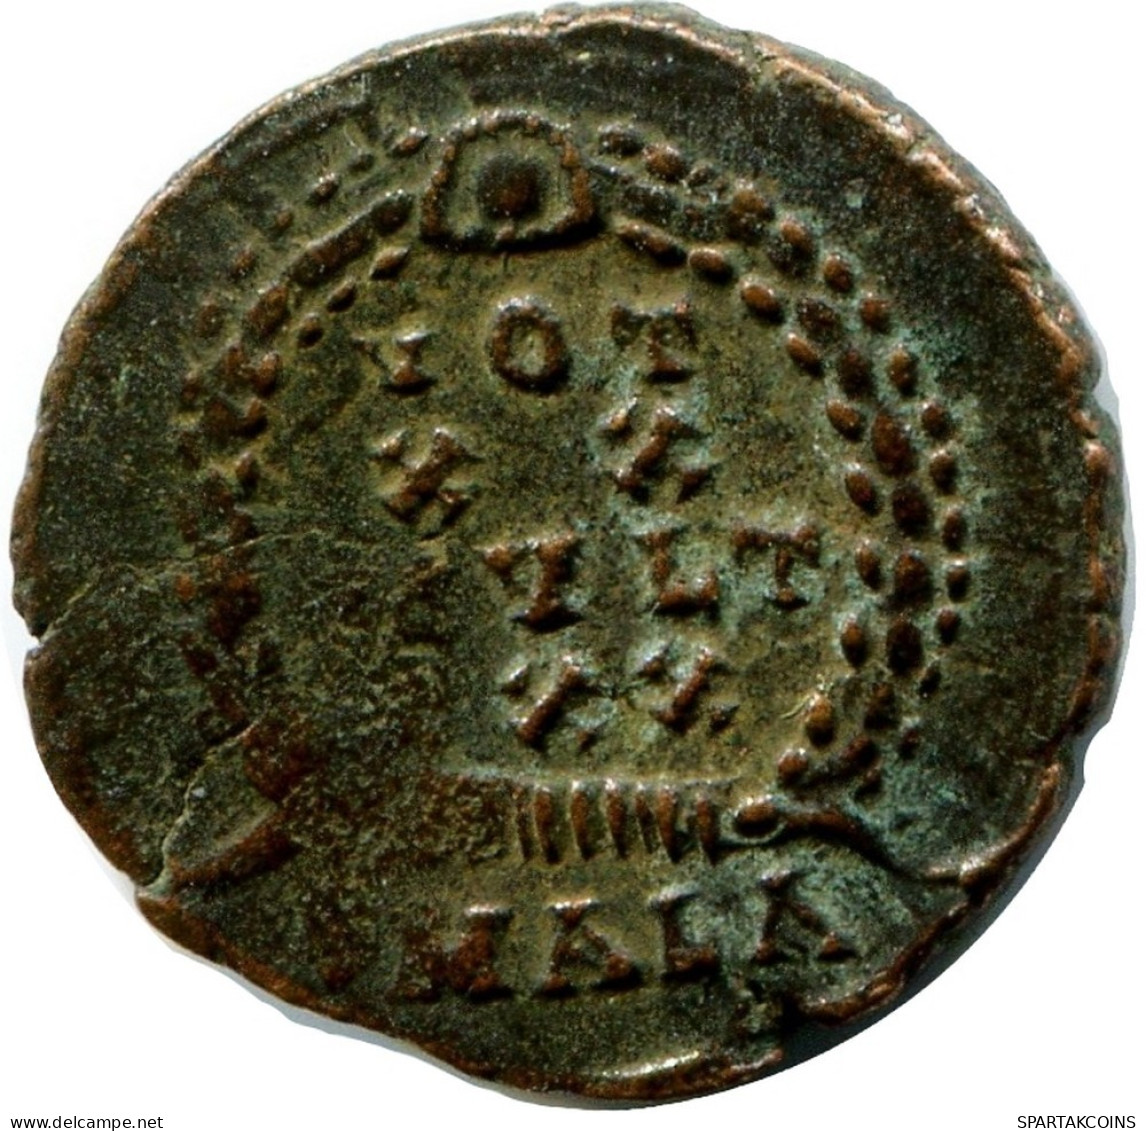 CONSTANS MINTED IN ALEKSANDRIA FROM THE ROYAL ONTARIO MUSEUM #ANC11469.14.U.A - The Christian Empire (307 AD To 363 AD)